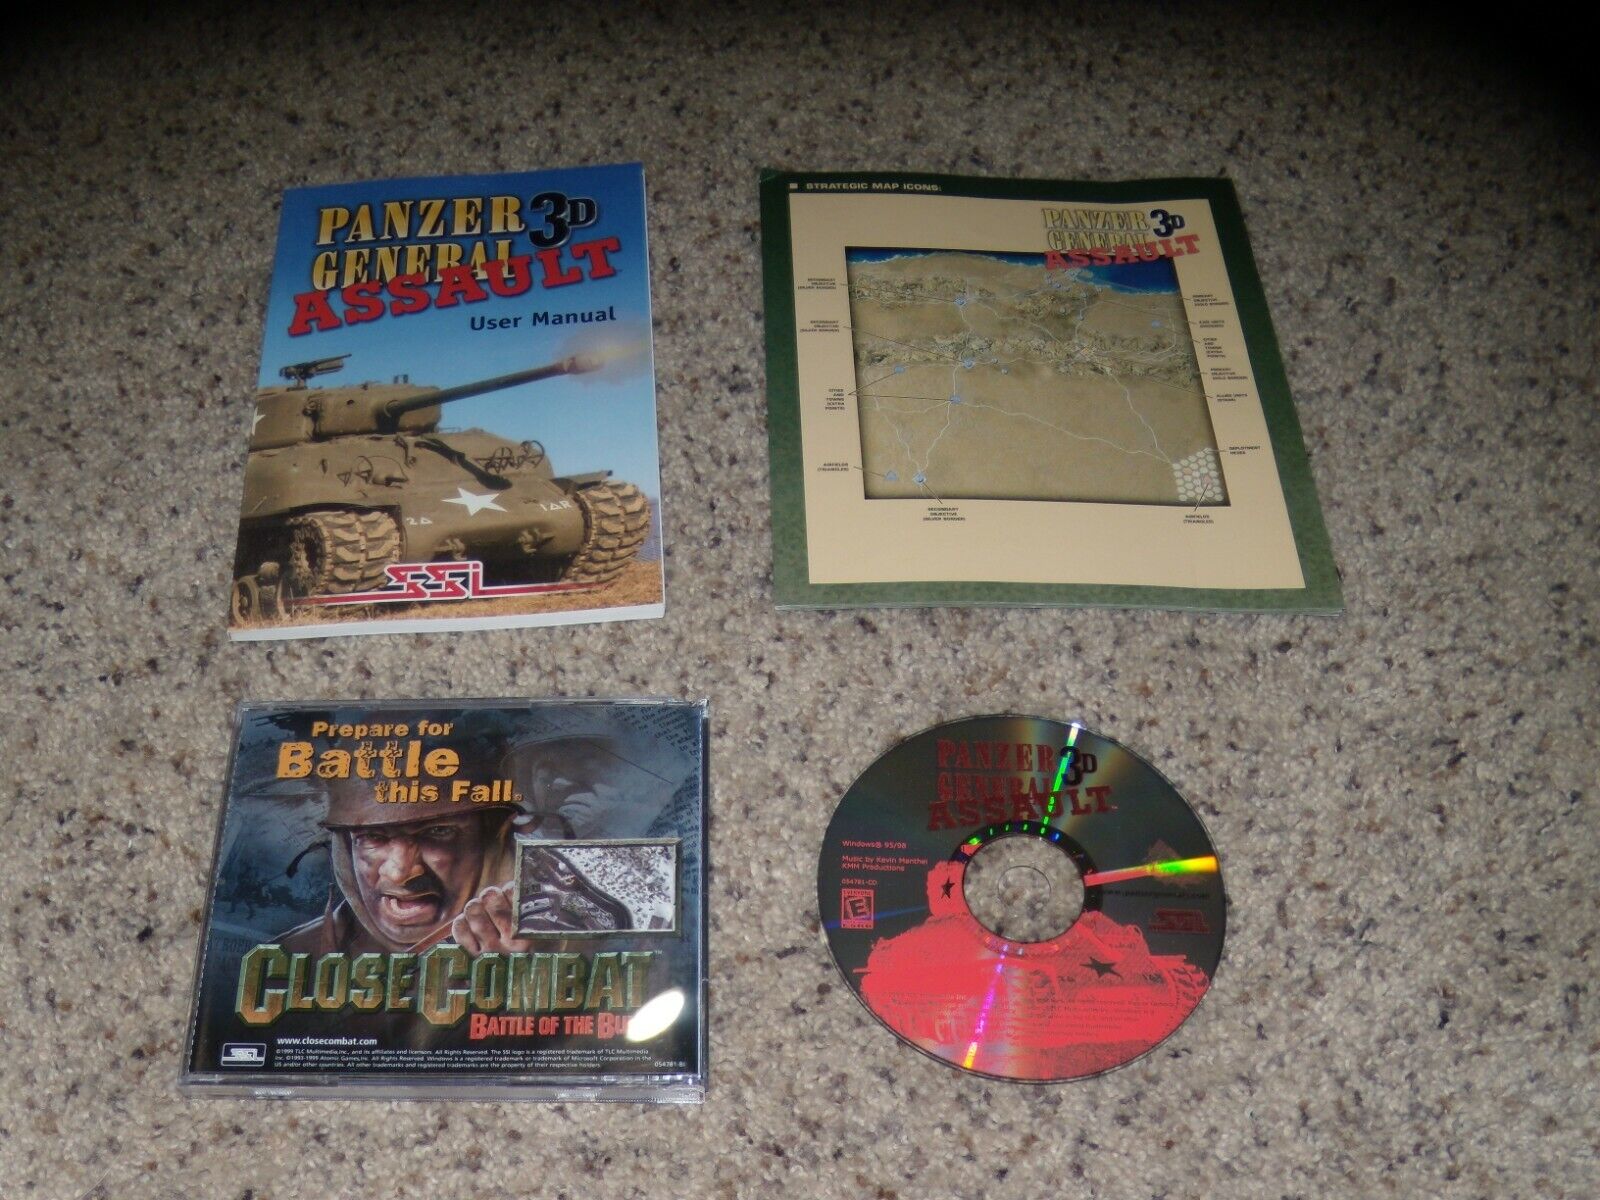 Panzer General Assault 3D (PC, 1999) Mint Game with manual and insert